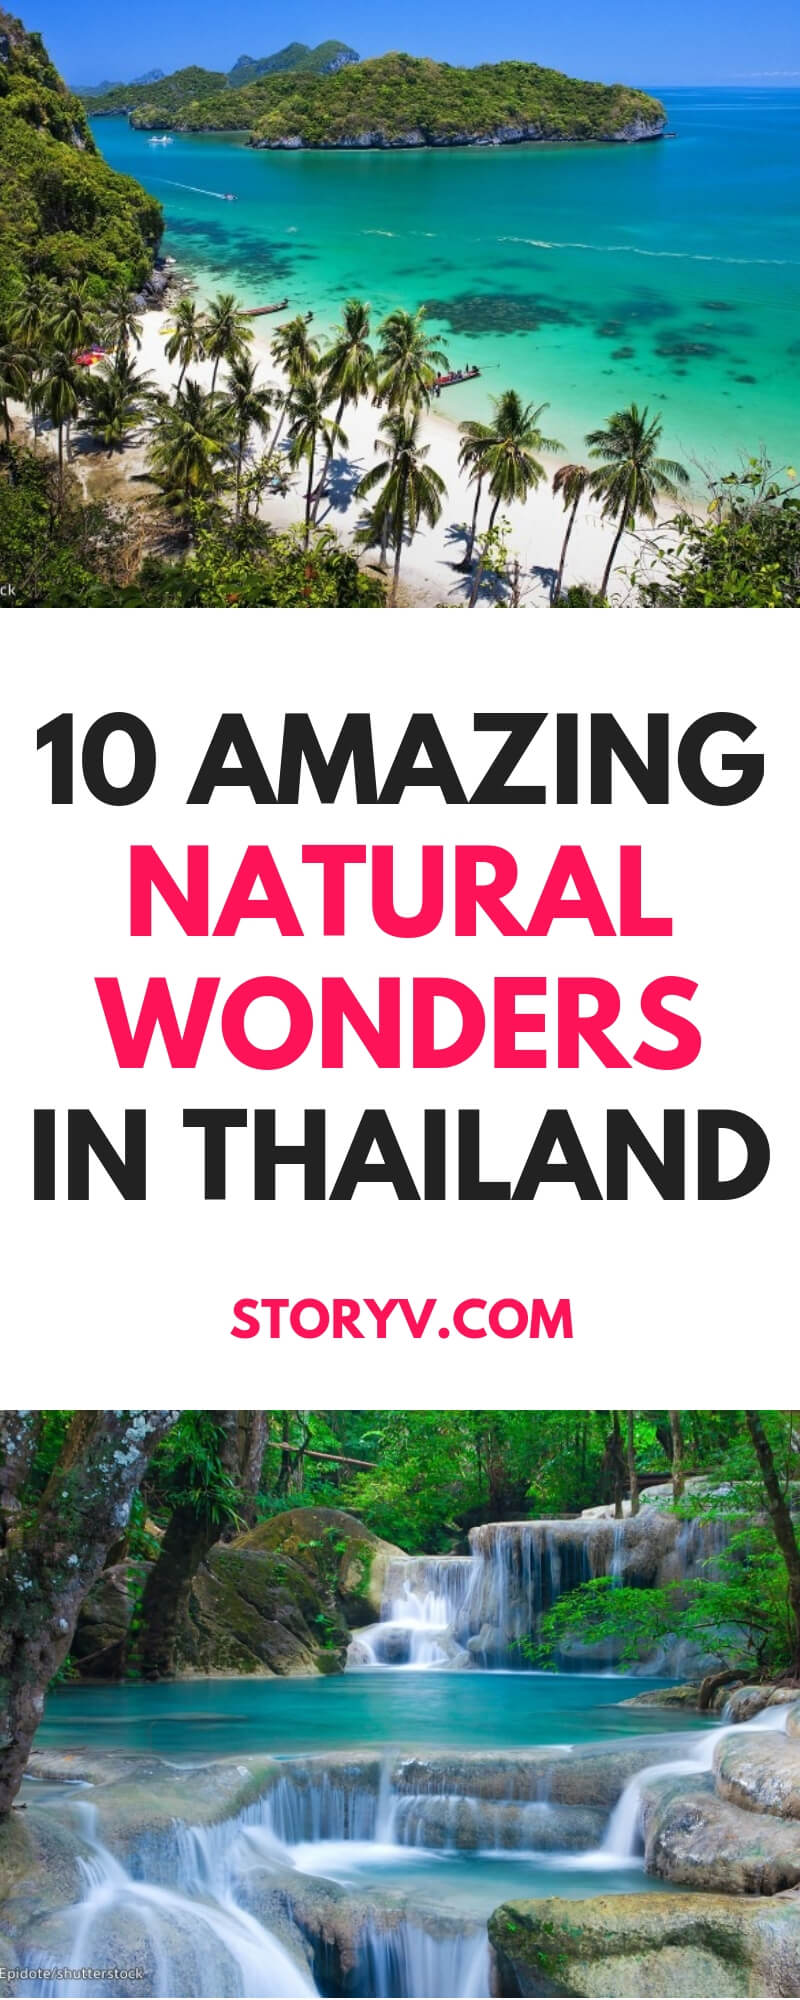 Discover and explore the rich beauty and biodiversity of Thailand. Here are 10 amazing natural wonders in Thailand you cannot miss!